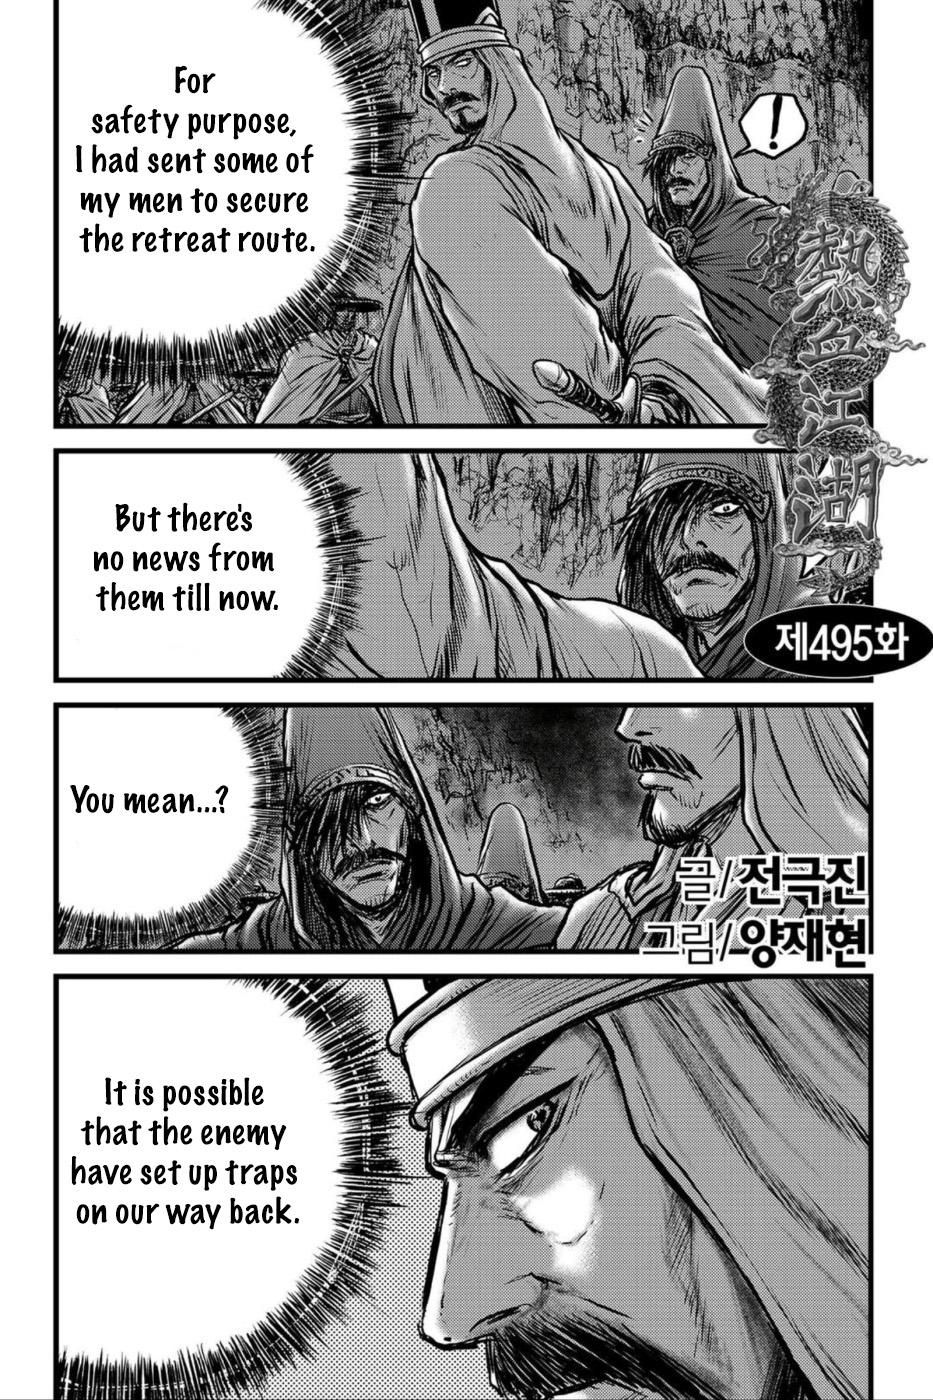 Ruler of the Land Vol.68 Ch.495